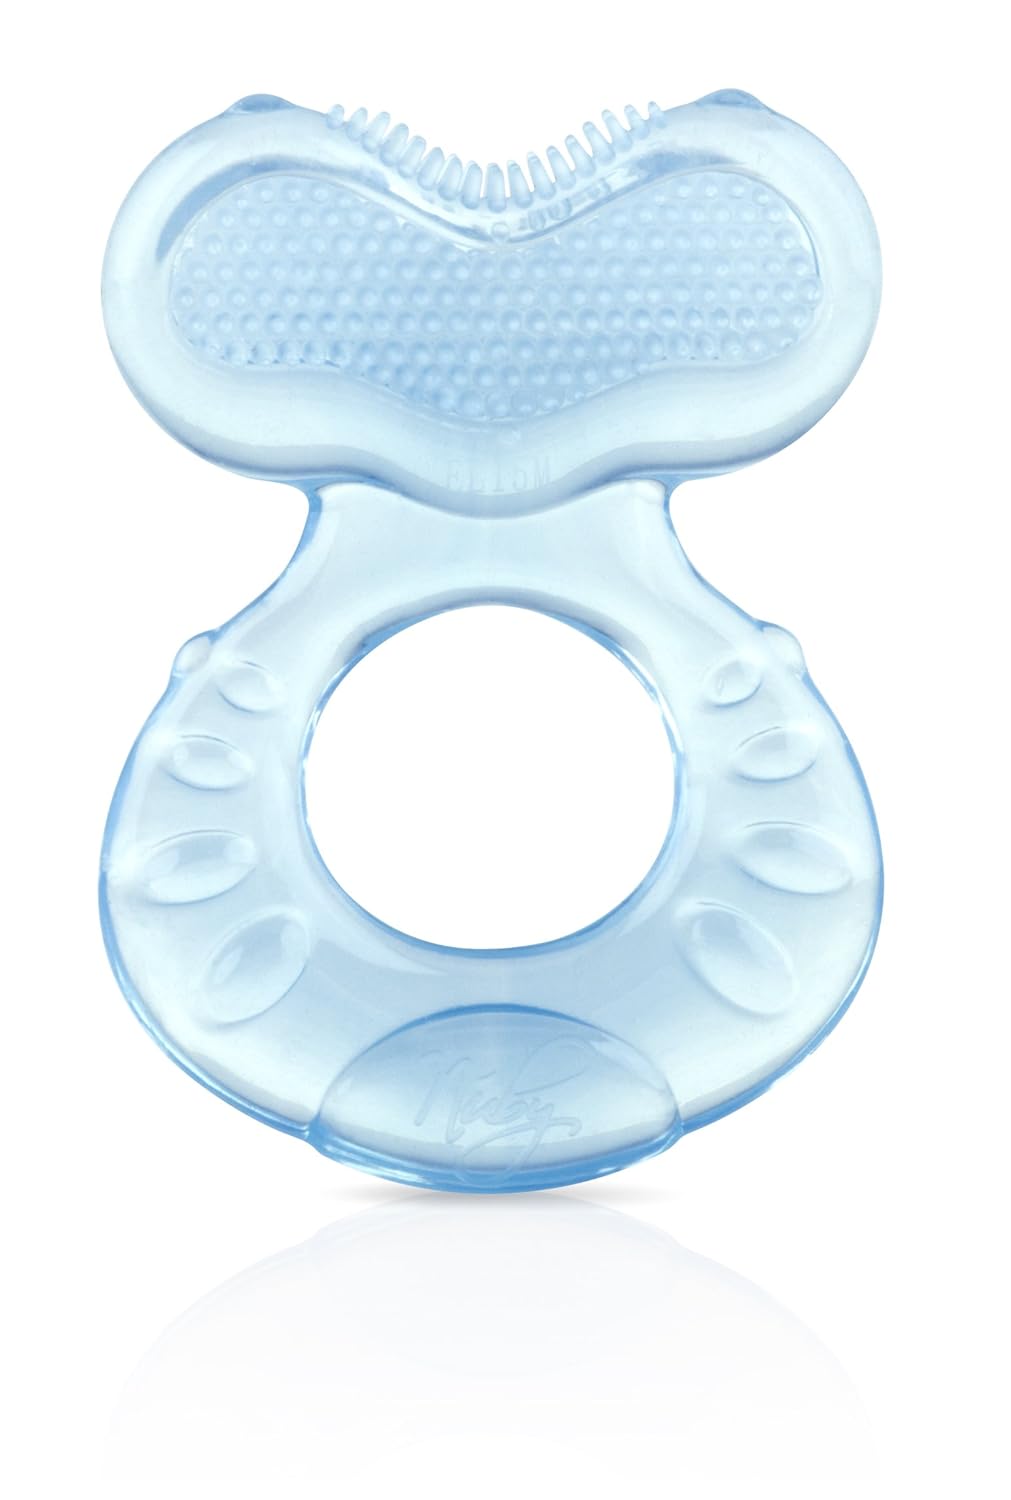 https://thepintopony.com/wp-content/uploads/2024/05/1714593718_270_Nuby-Teether-Soothe-Your-Babys-Gums-with-Innovation.jpg